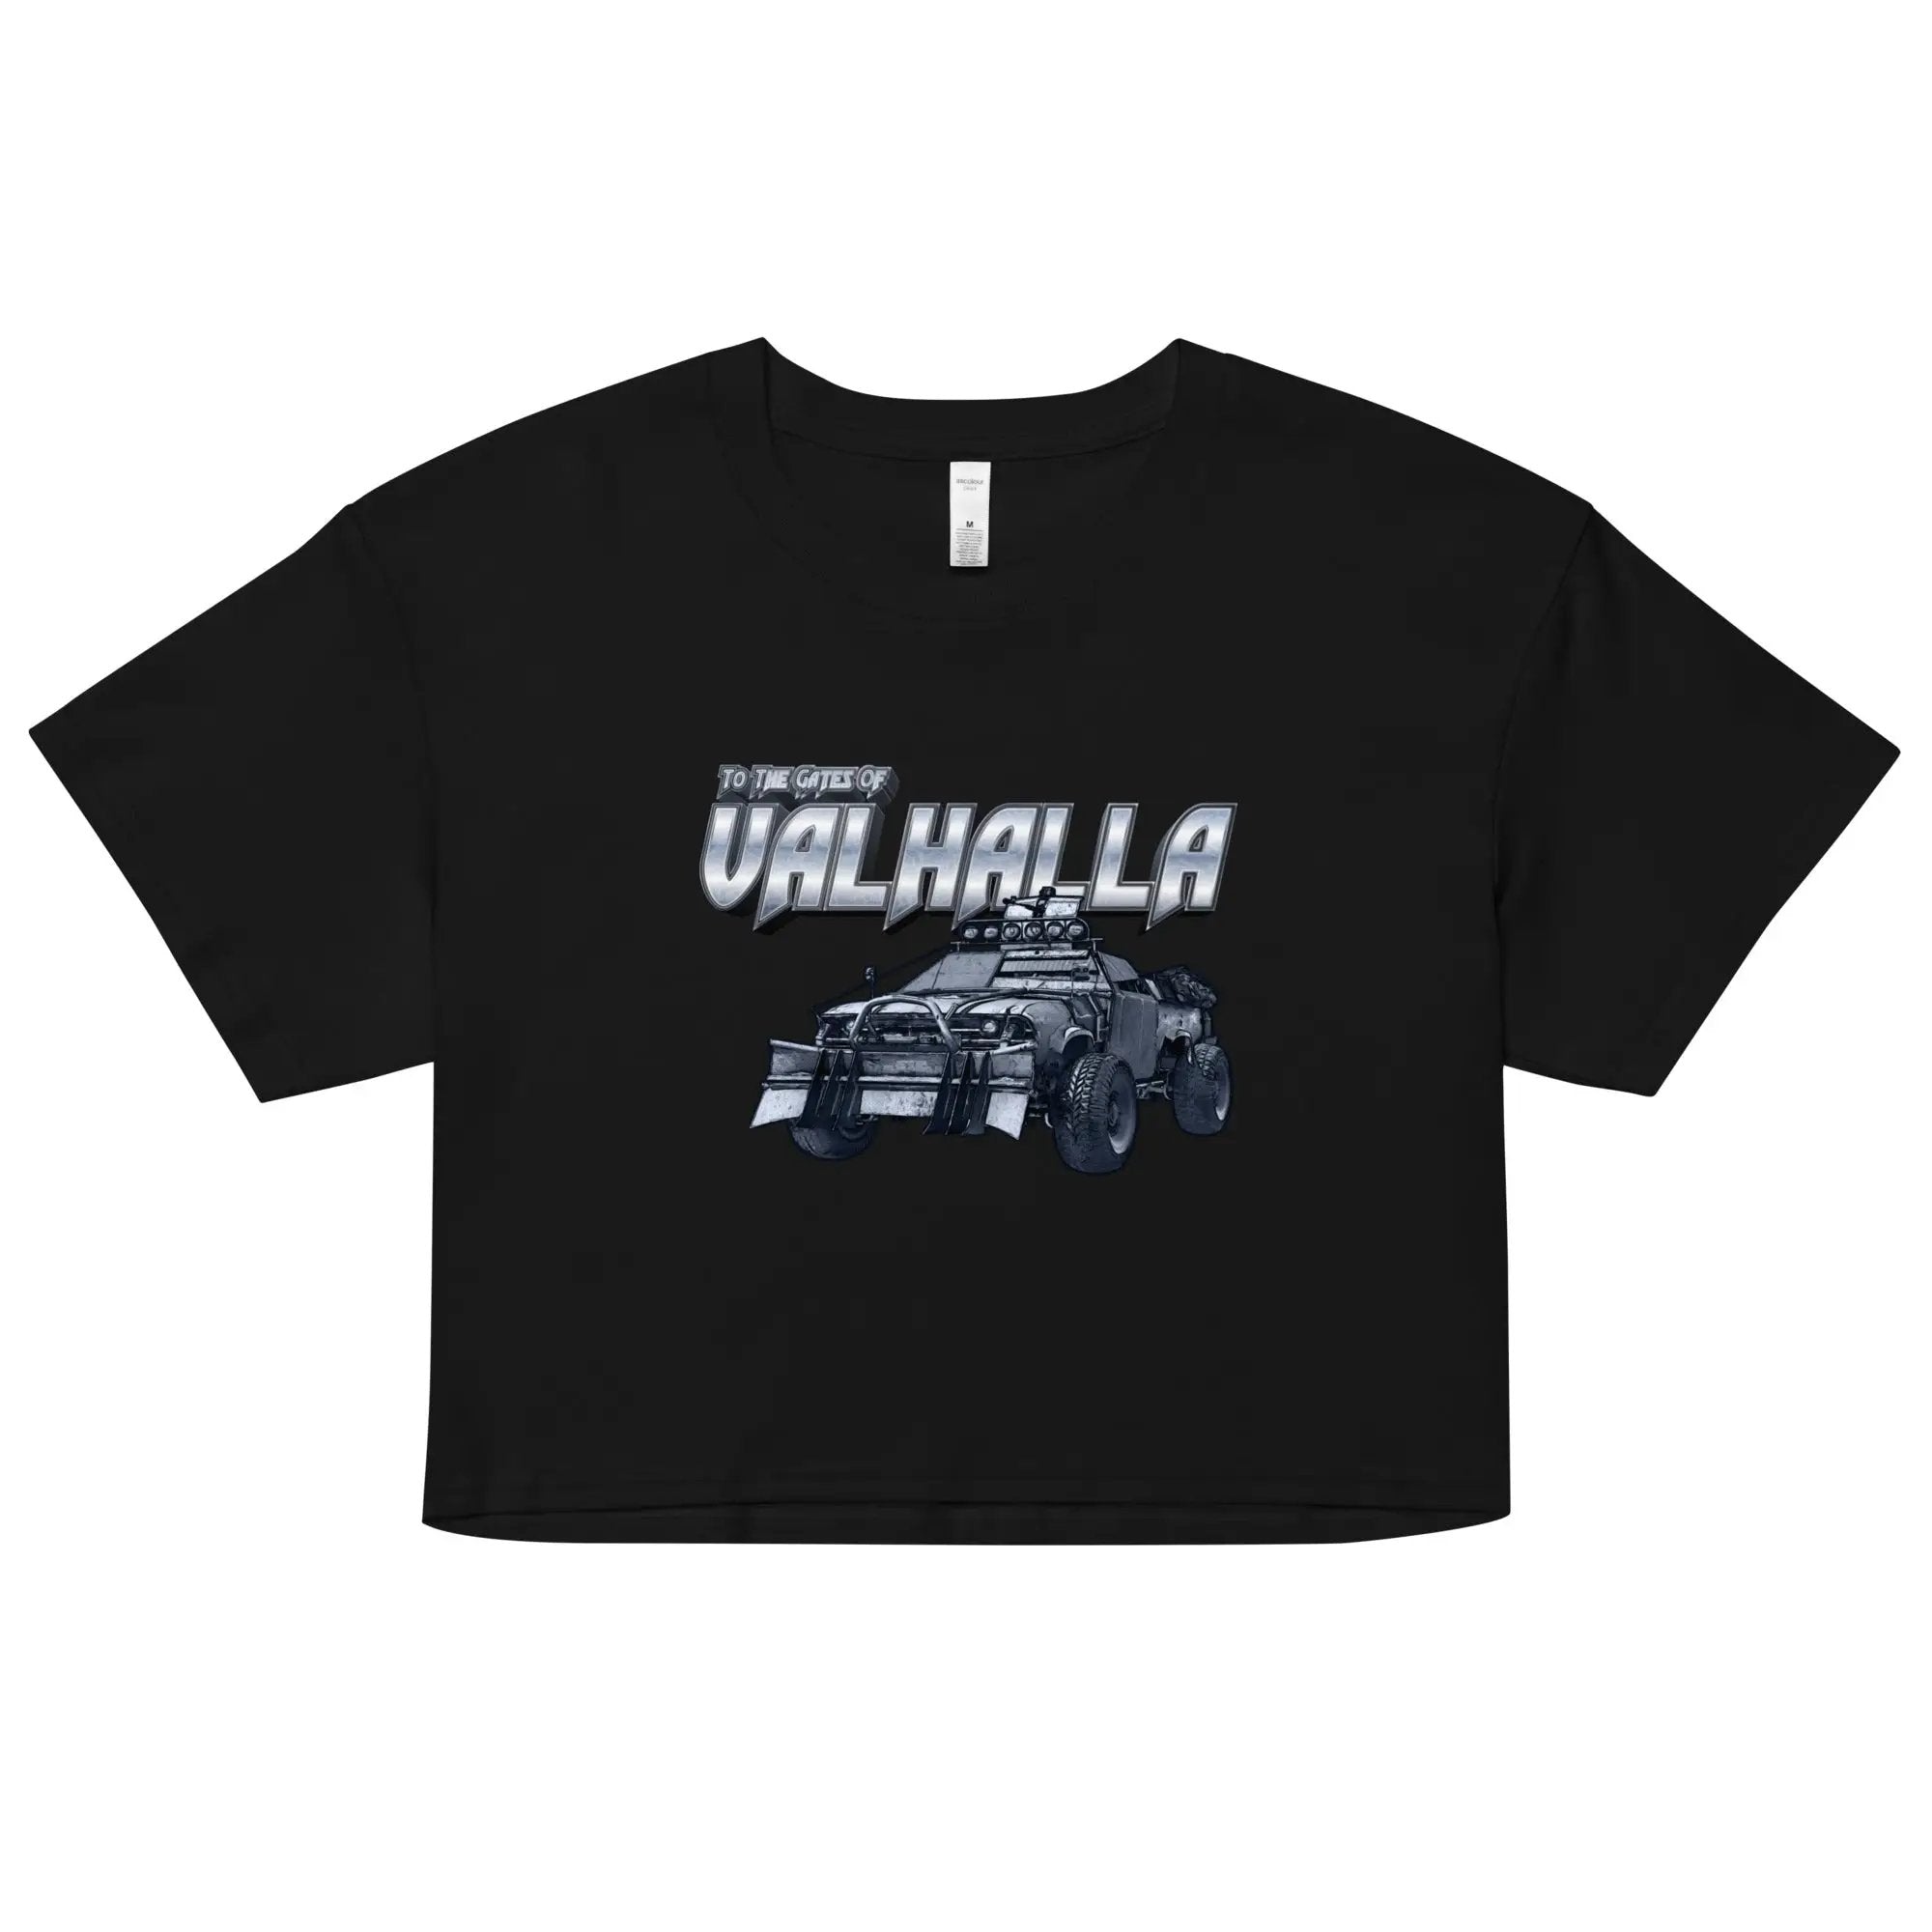 a black t - shirt with an image of a vehicle on it